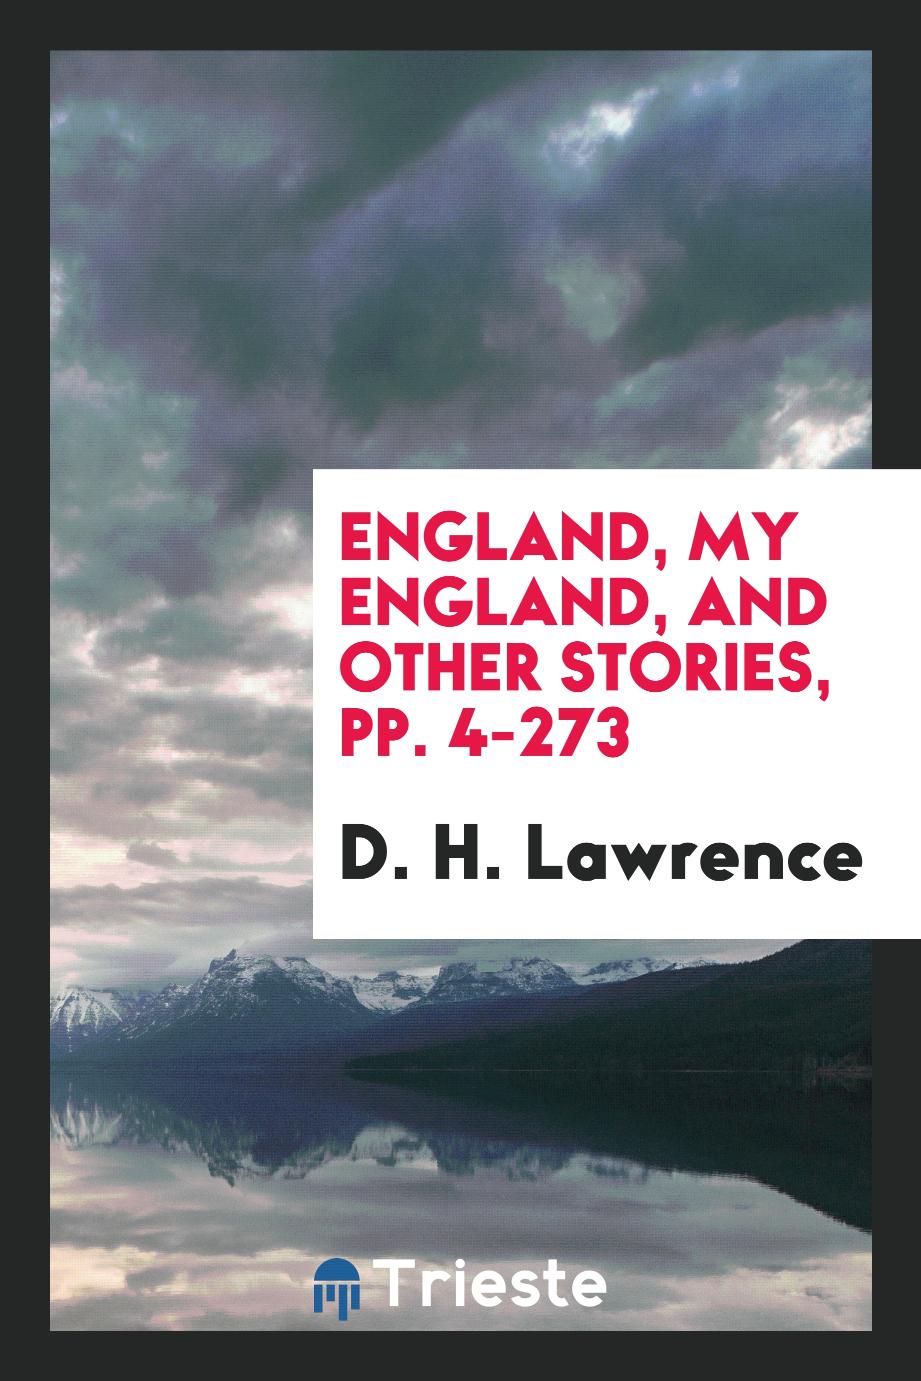 England, My England, and Other Stories, pp. 4-273